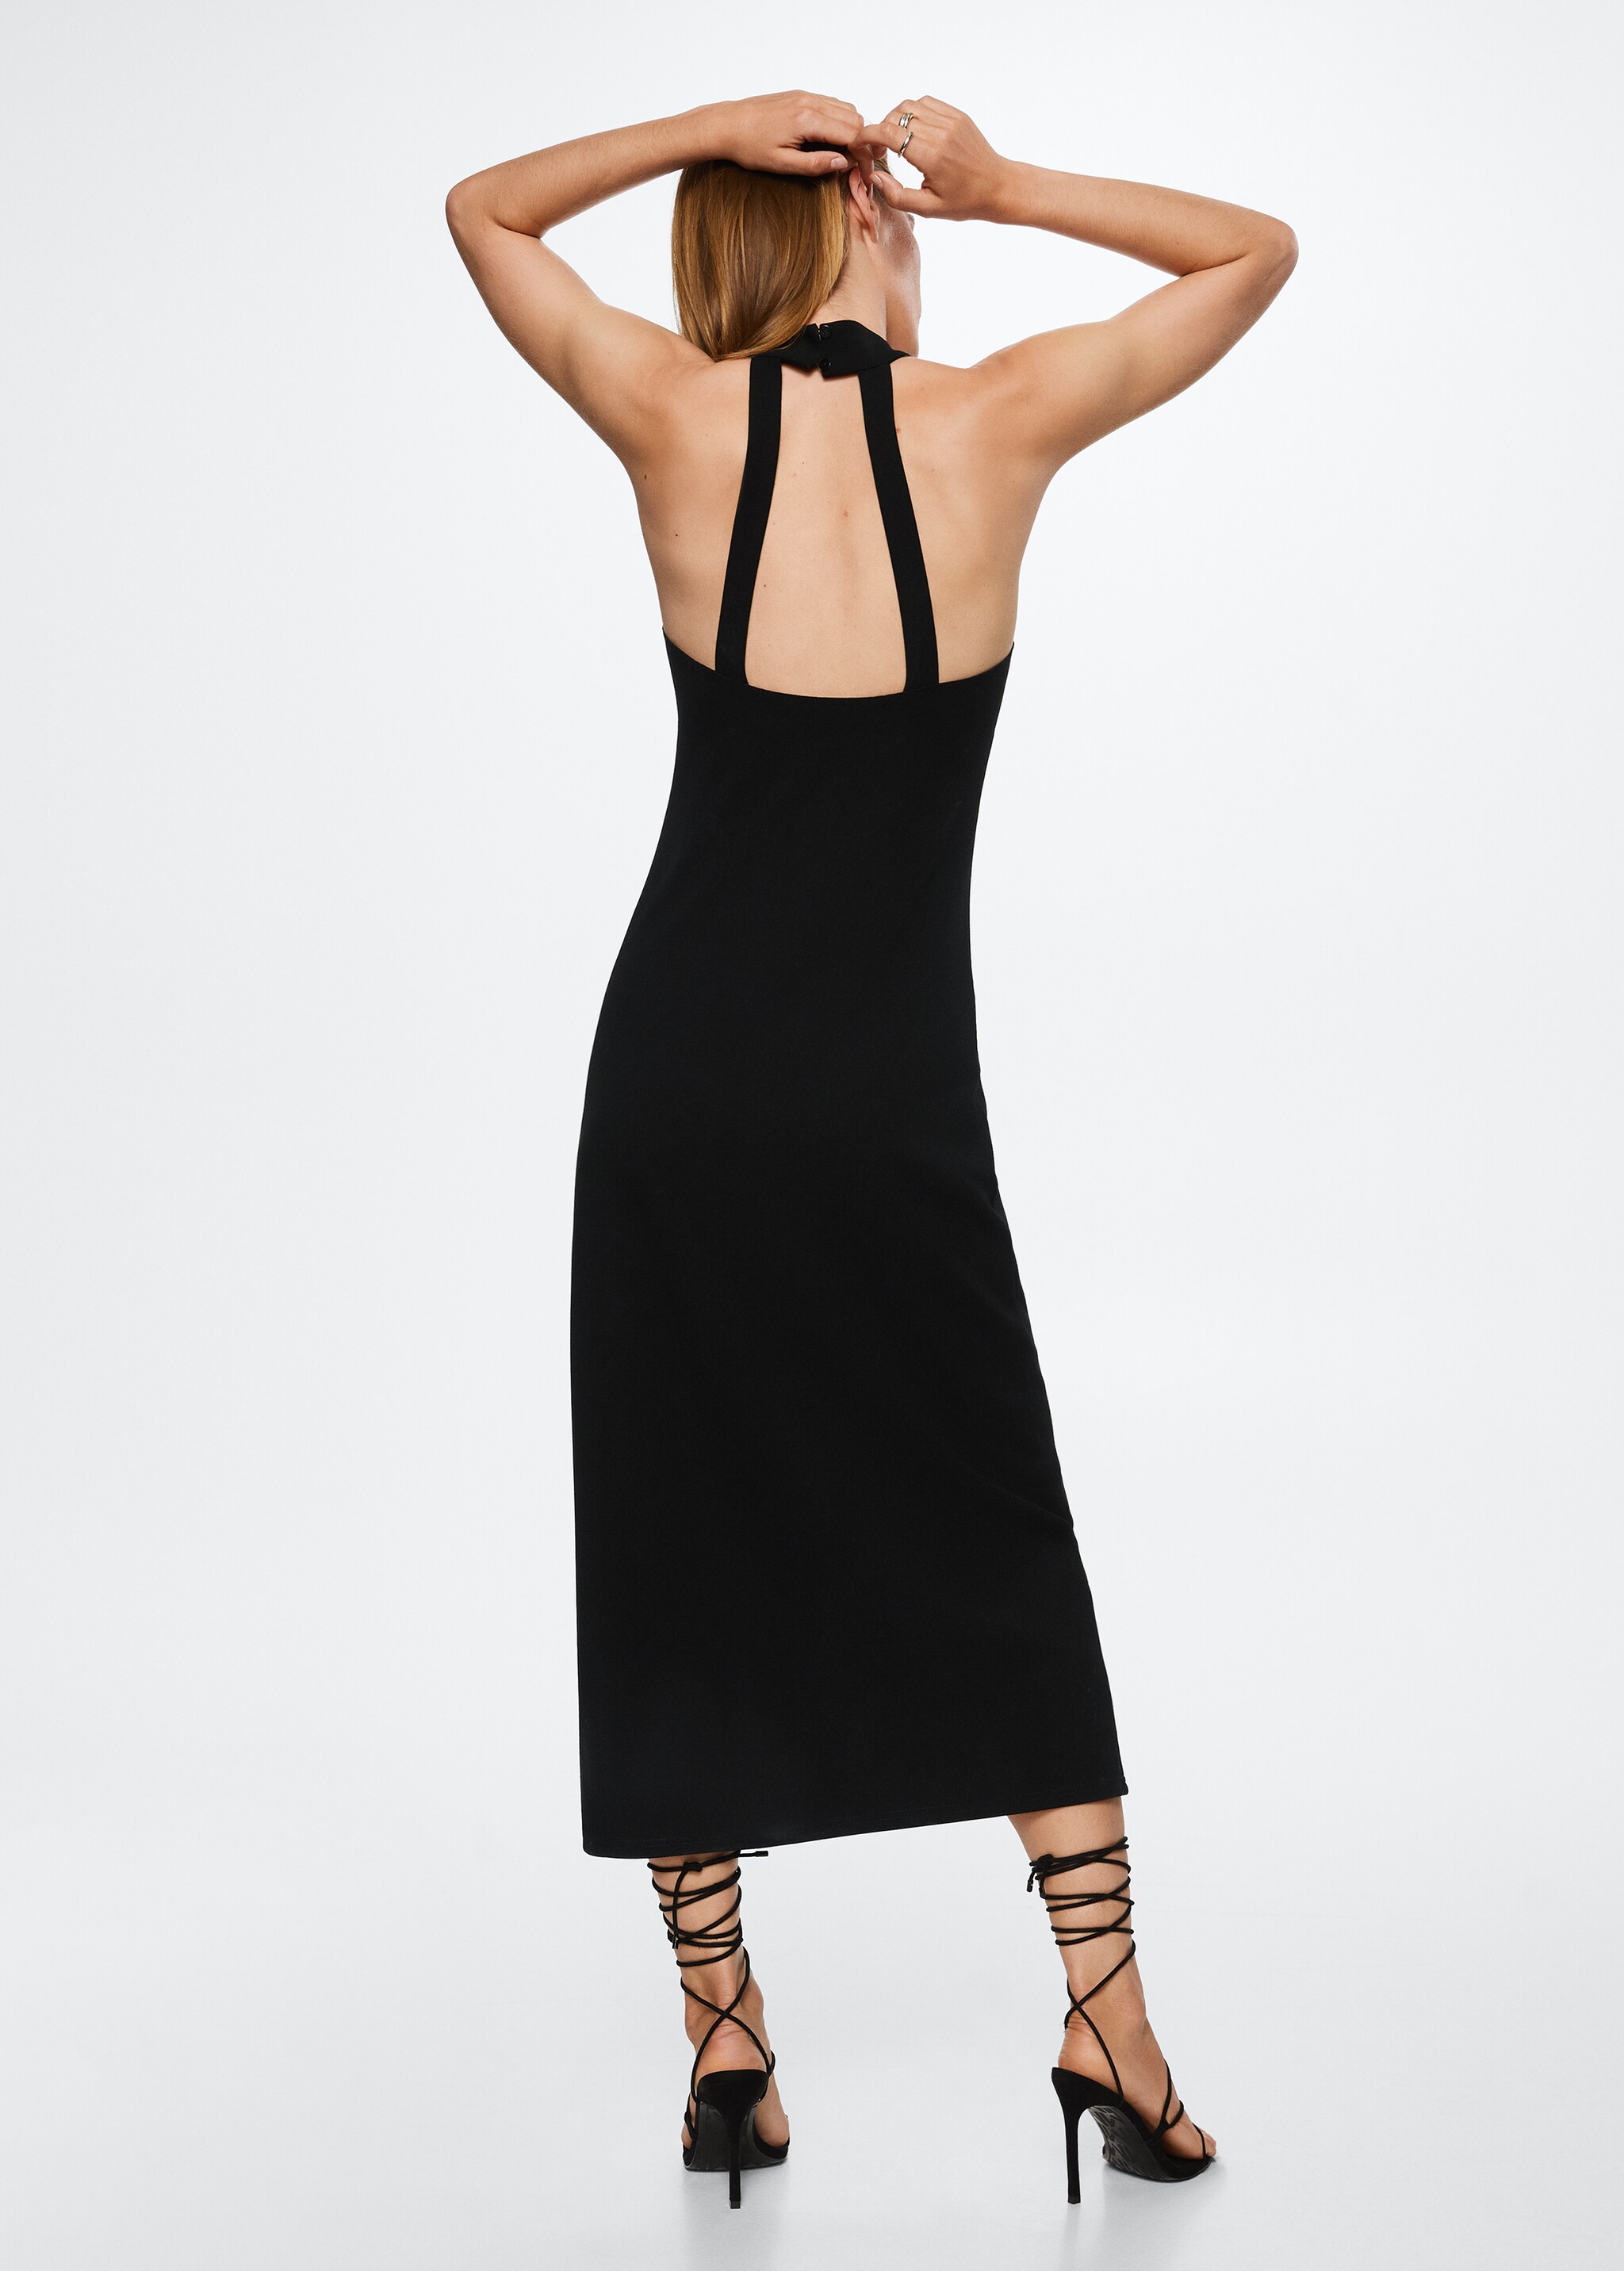 Cut-out back dress - Reverse of the article